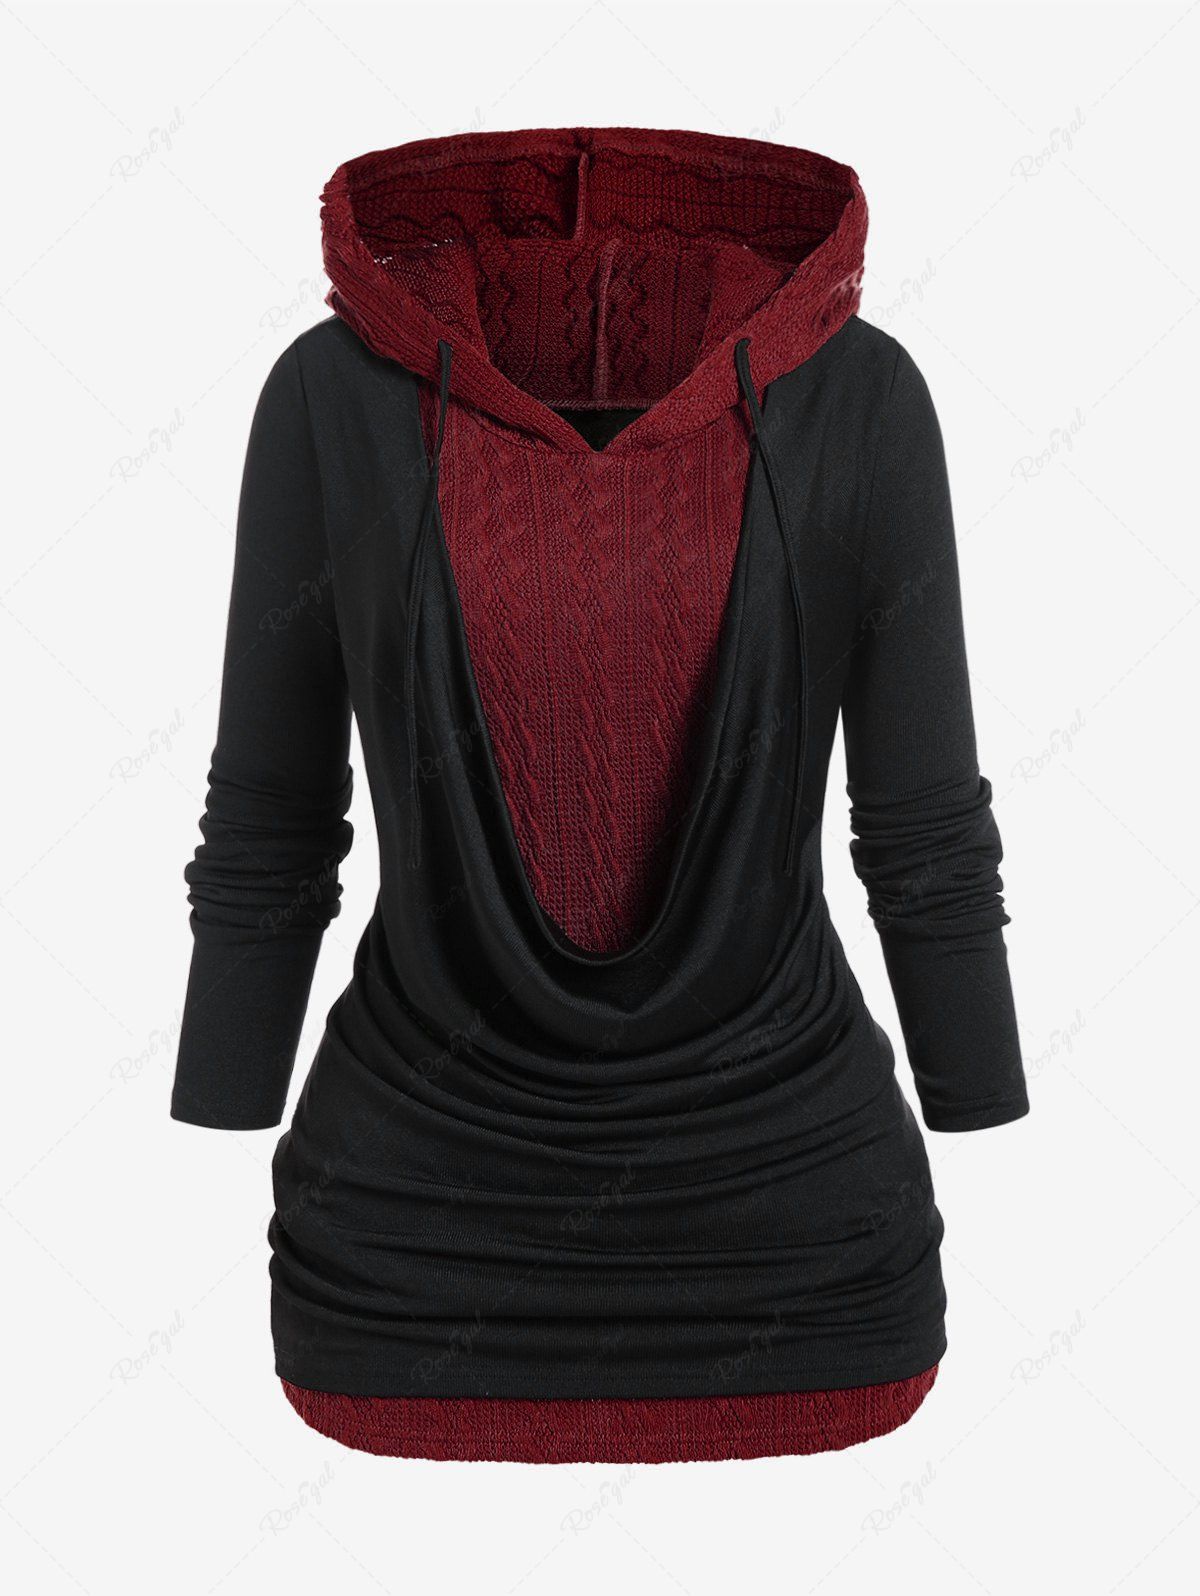 Discount Plus Size Cowl Front Hooded 2 in 1 Cable Knit Top  